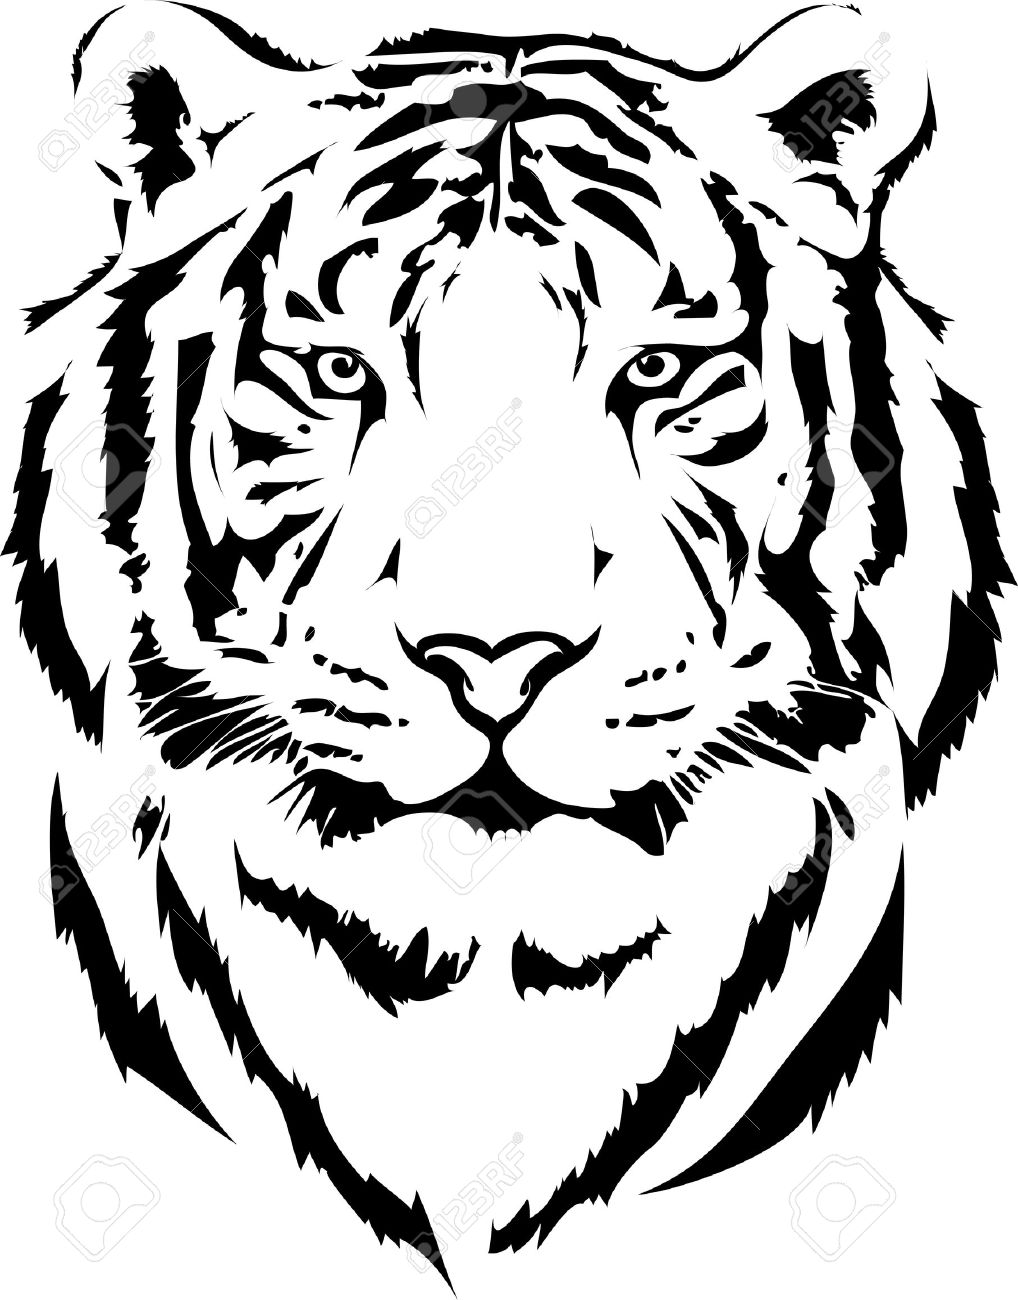 Tiger head clipart black and white